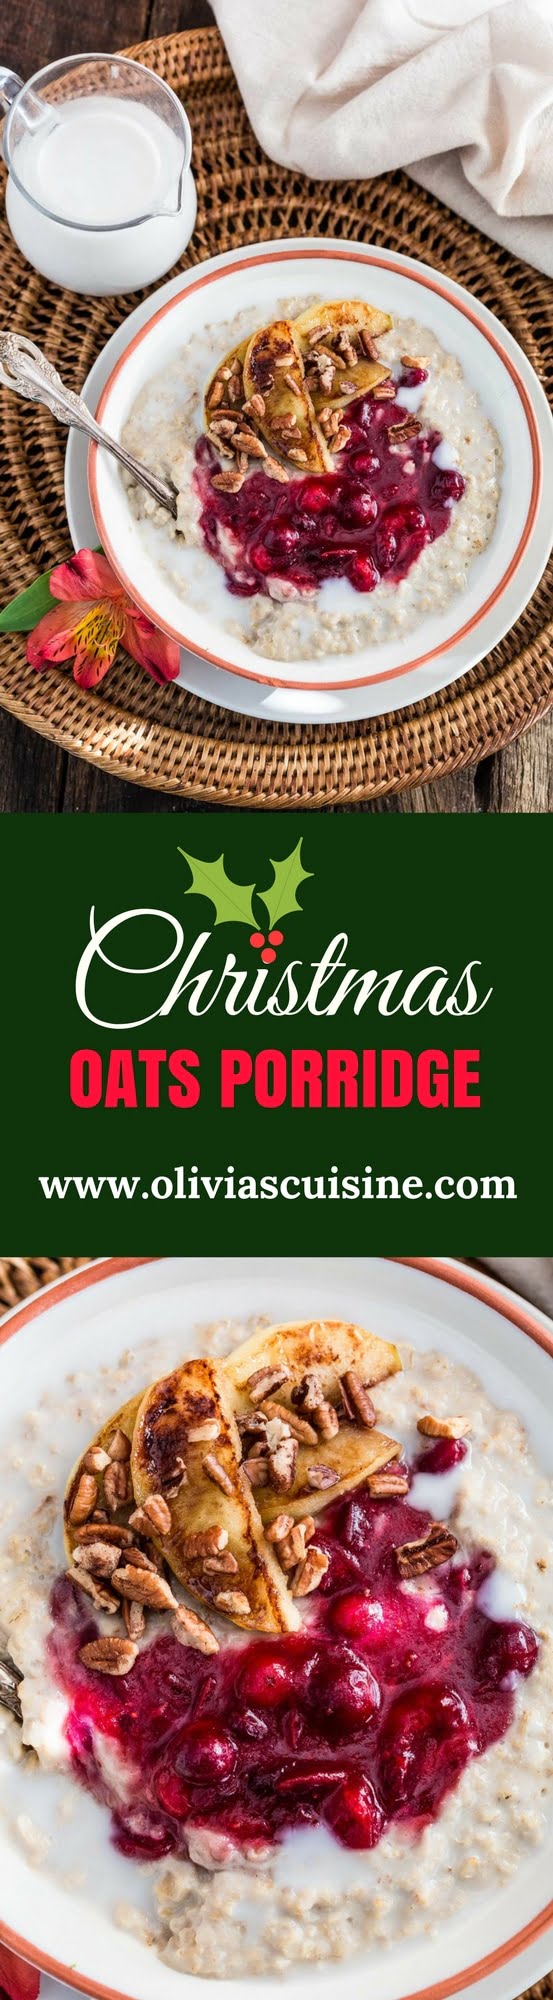 Christmas Oats Porridge with Cranberry Sauce, Apples and Pecans | www.oliviascuisine.com | Waking up to a special breakfast on Christmas morning is a must! This festive porridge is not only delicious and heartwarming but also dairy free. Sweet, tart, creamy and crunchy goodness. What else could we wish for?